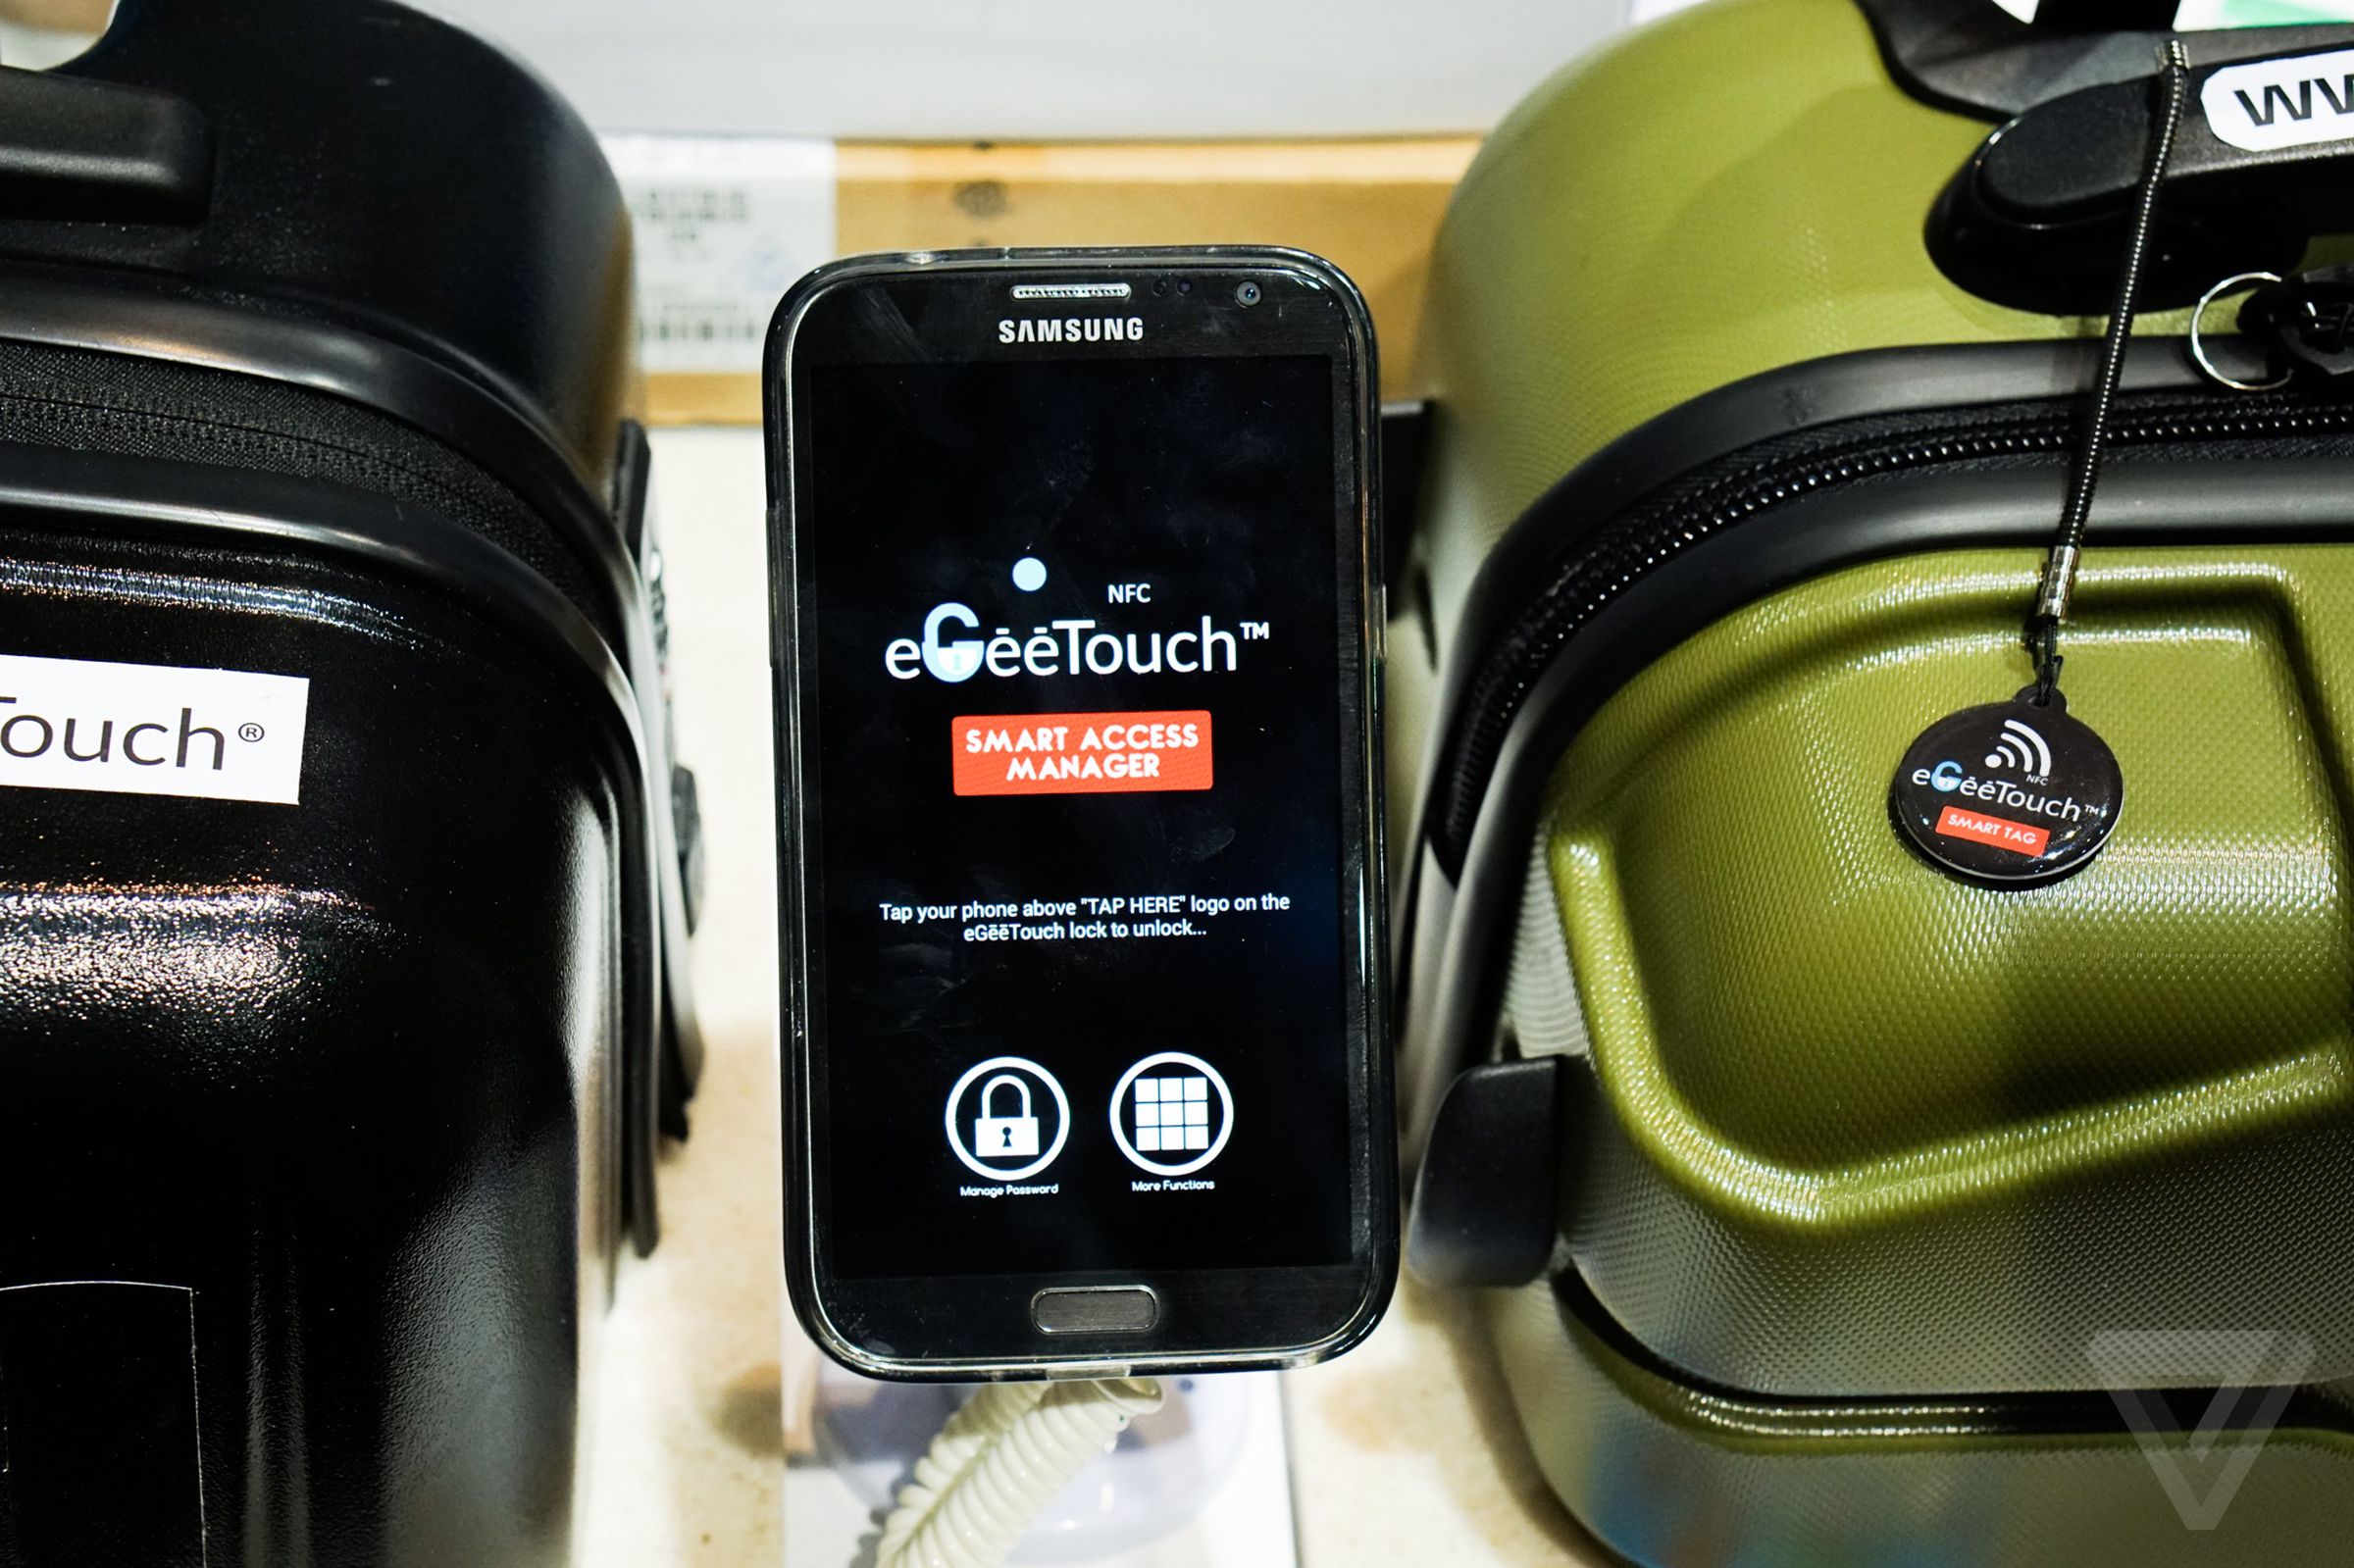 eGeeTouch smart luggage lock hands-on photos